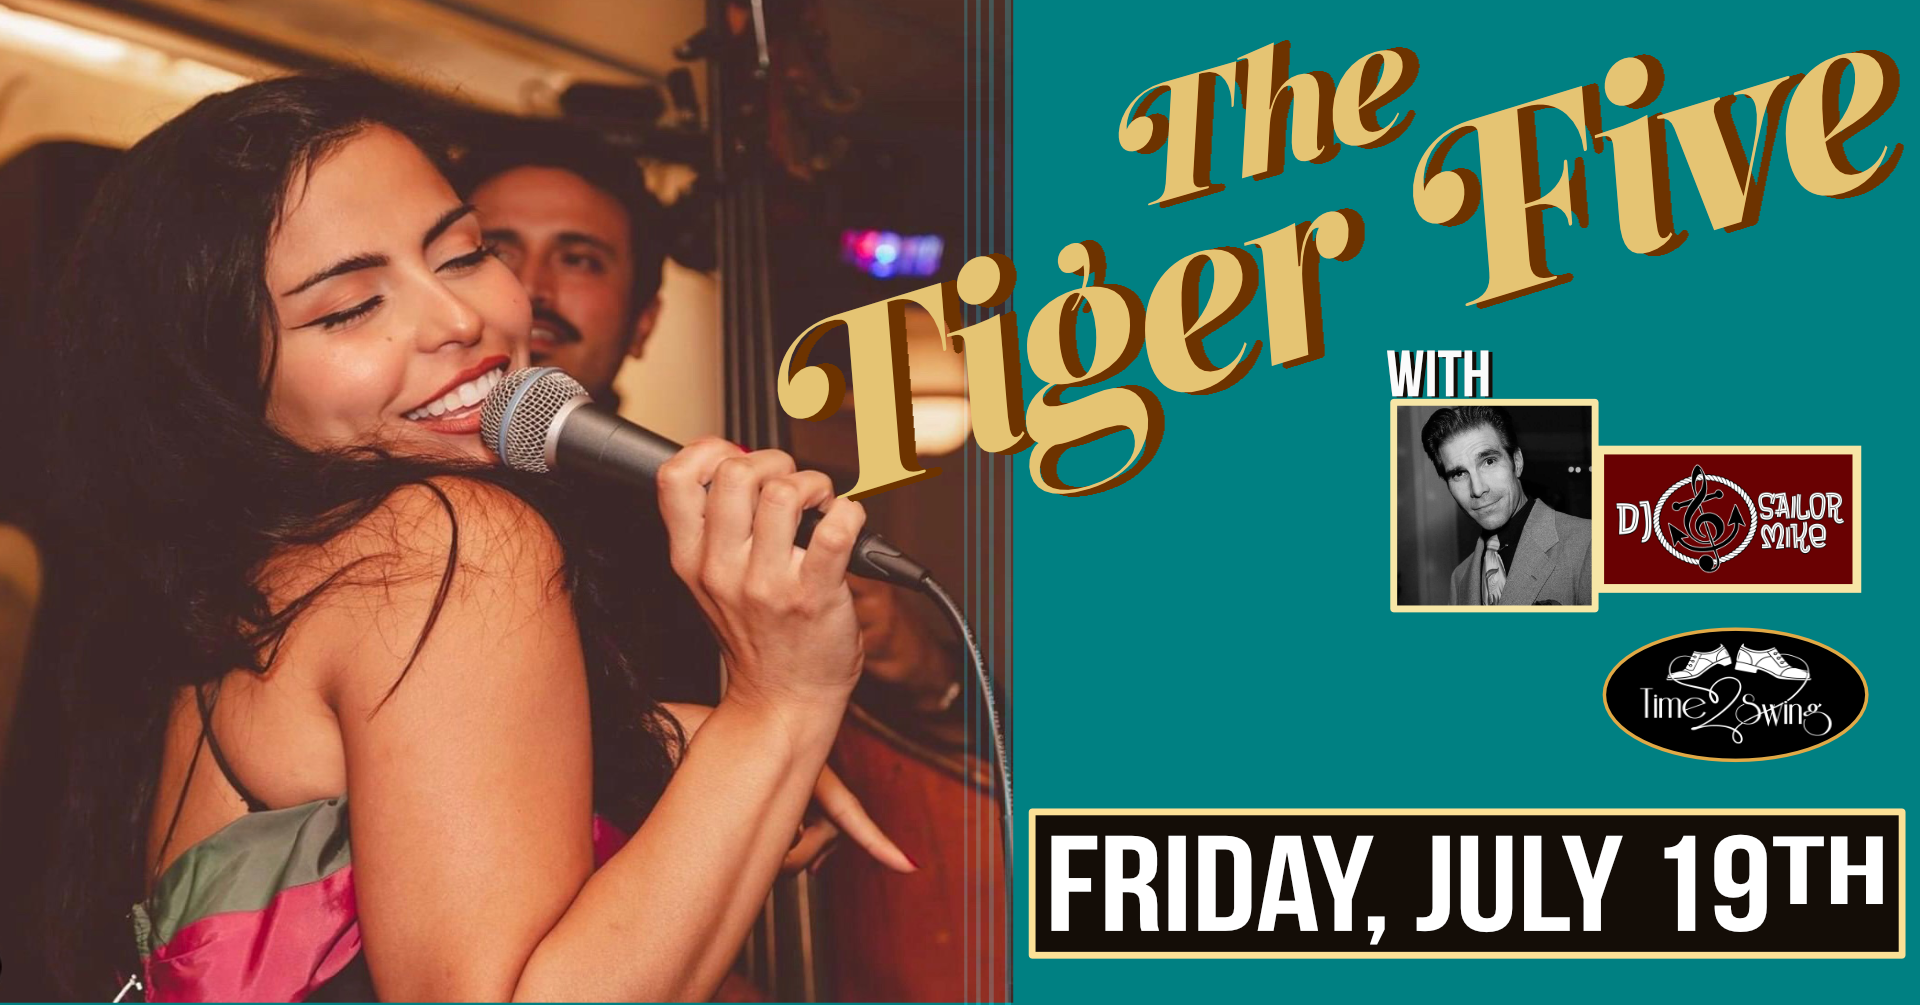 THE TIGER FIVE with DJ SAILOR MIKE at The Burbank Moose Lodge